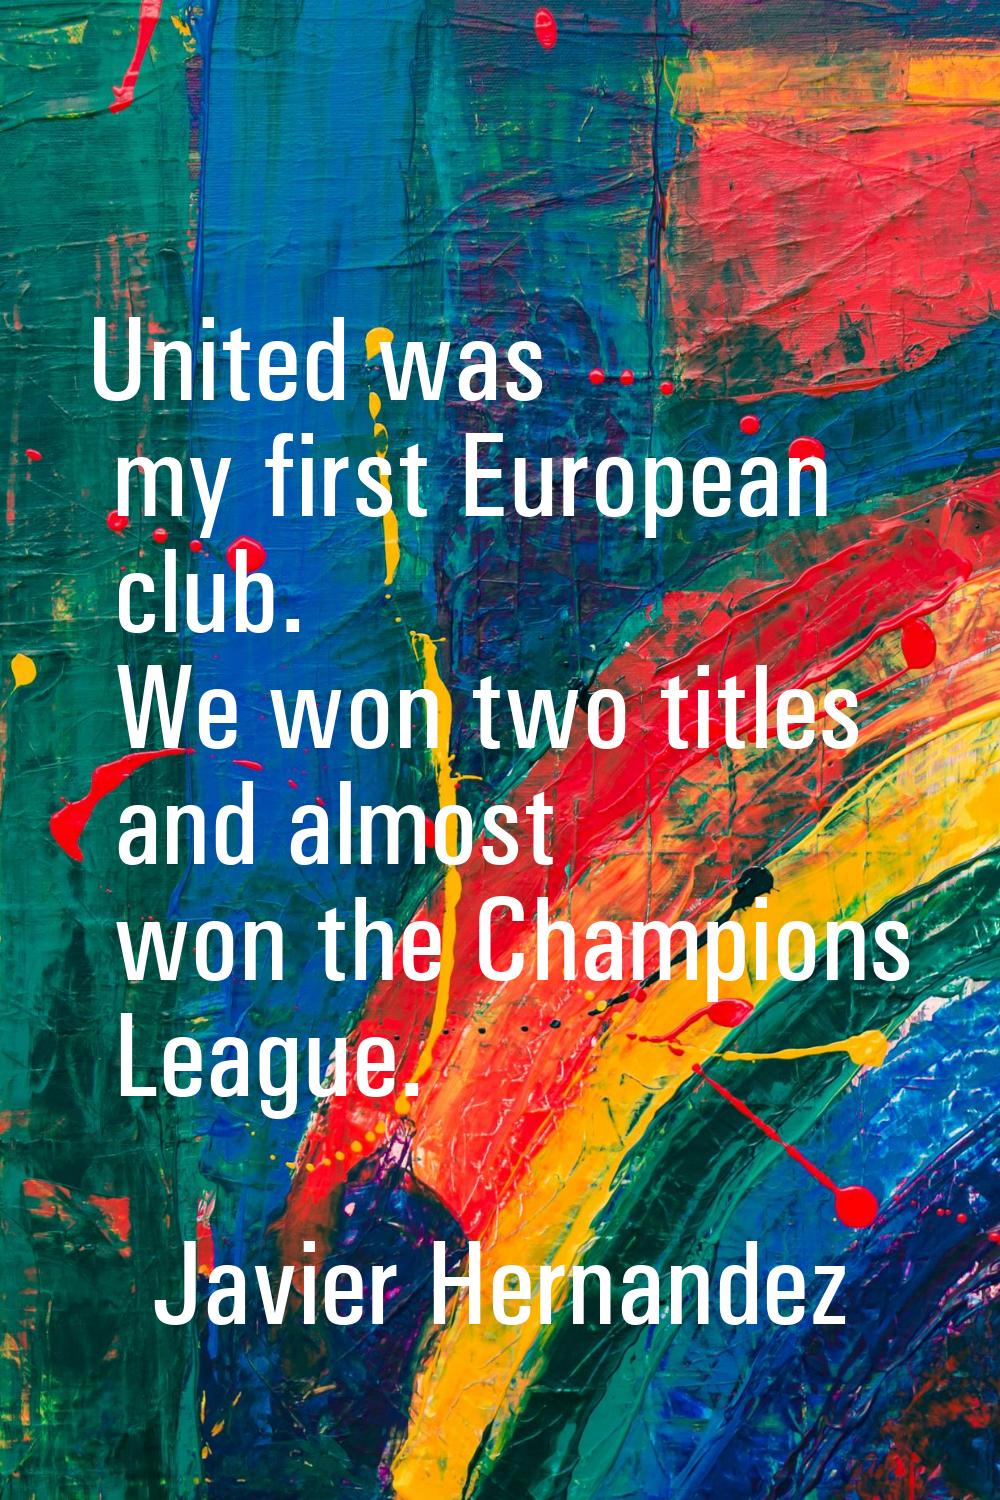 United was my first European club. We won two titles and almost won the Champions League.